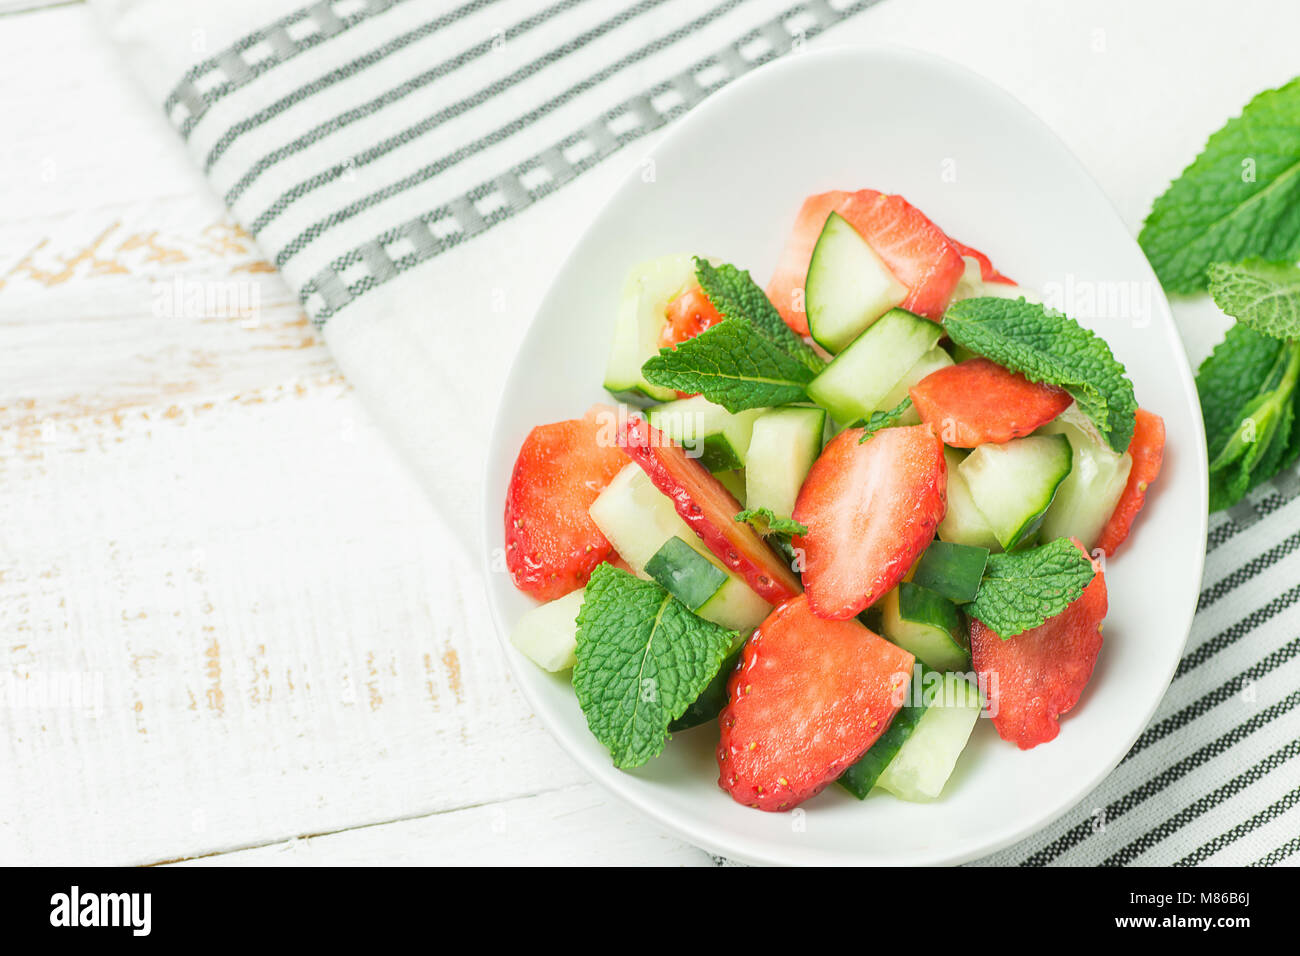 Fresh Detox Summer Spring Salad with Strawberries Green Mint Leaves in White Ceramic Bowl on Cotton Kitchen Towel. Plank Wood Table. Top View. Clean E Stock Photo